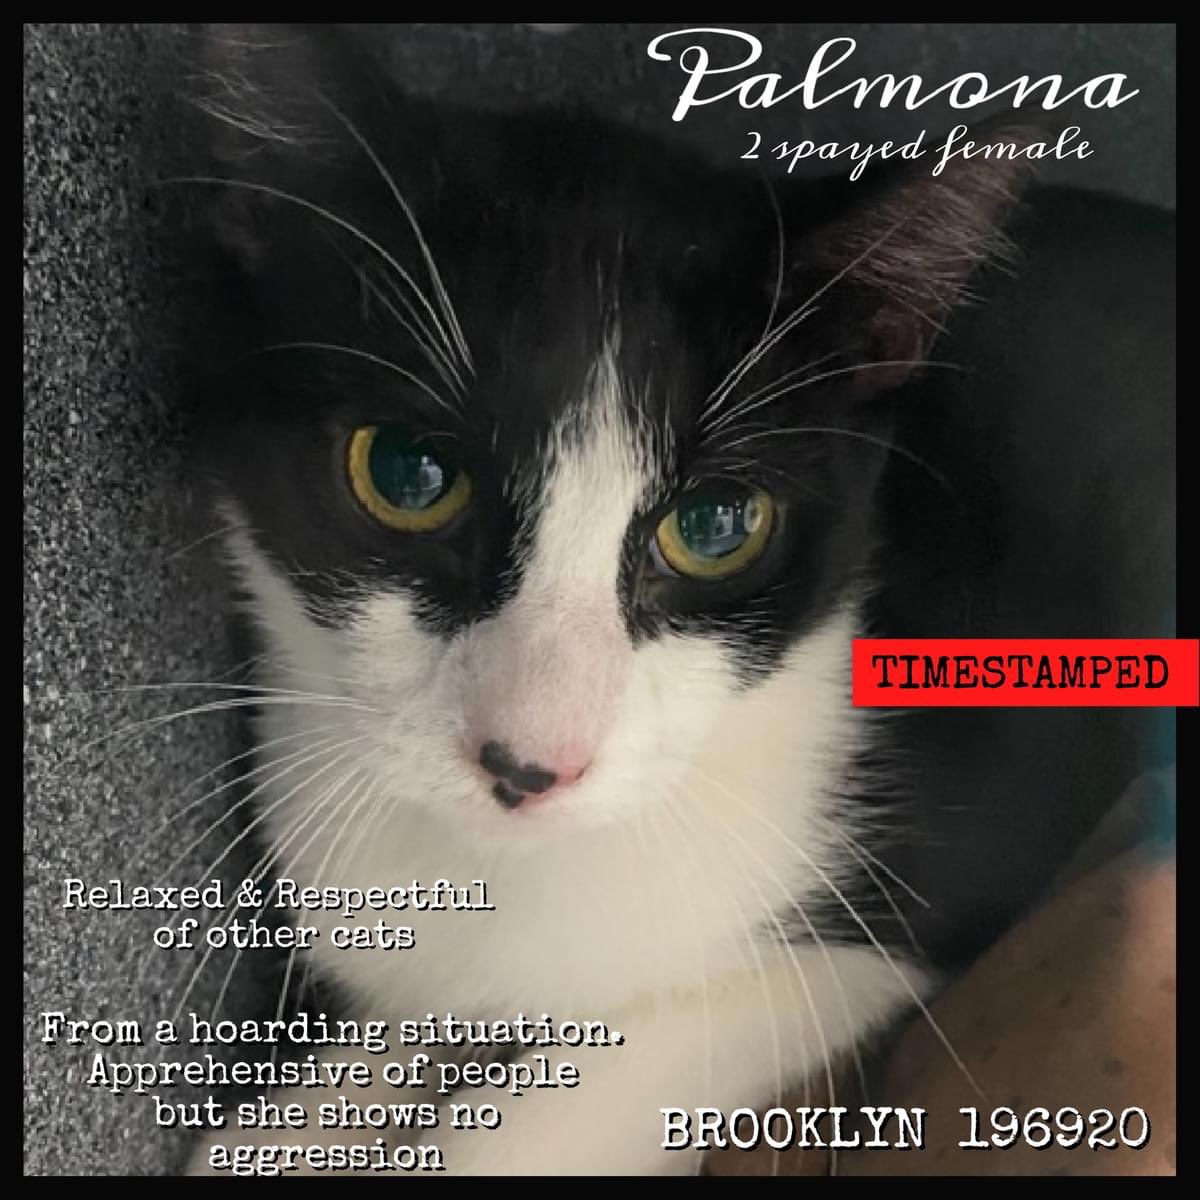 🆘Please RT-adopt-foster! 🆘 PALOMA is on the “emergency placement” list at #ACCNYC and needs out of the shelter by 12 NOON 5/11! #URGENT #NYC #CATS #NYCACC #TeamKittySOS #AdoptDontShop #CatsOfTwitter newhope.shelterbuddy.com/Animal/Profile…